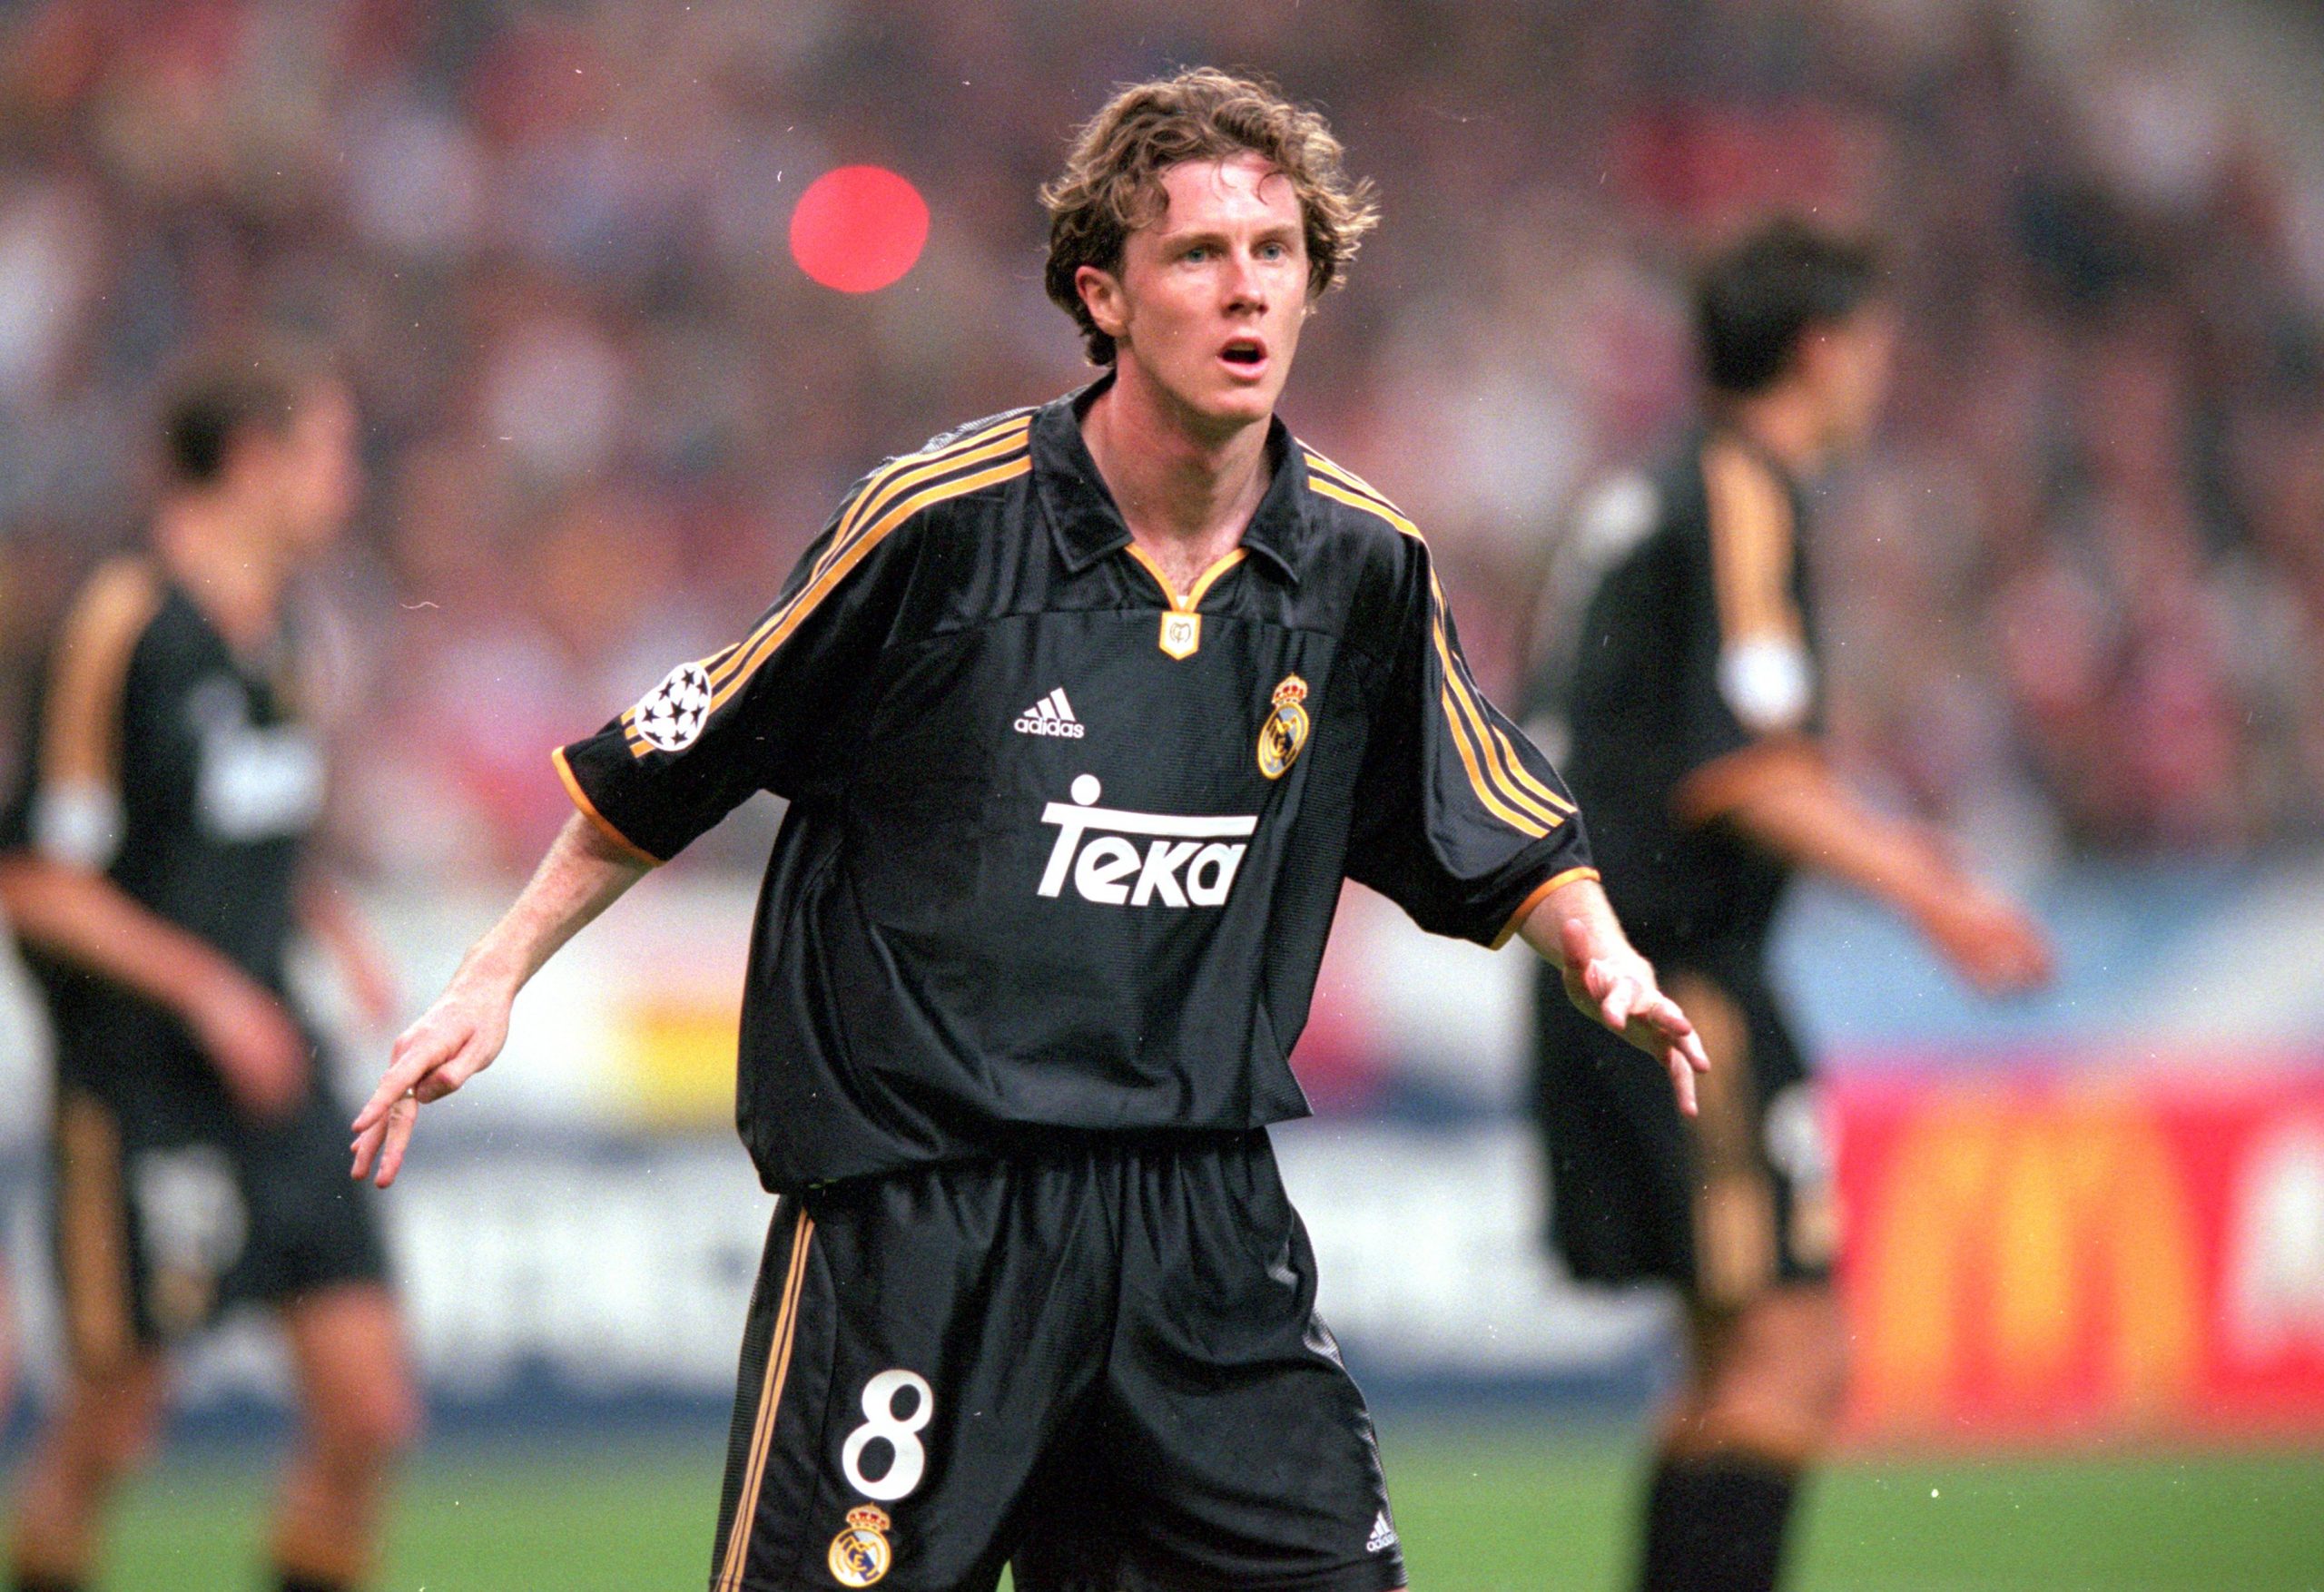 Liverpool icon Steve McManaman reveals how it felt scoring in a UEFA Champions League final for Real Madrid - Soccersouls